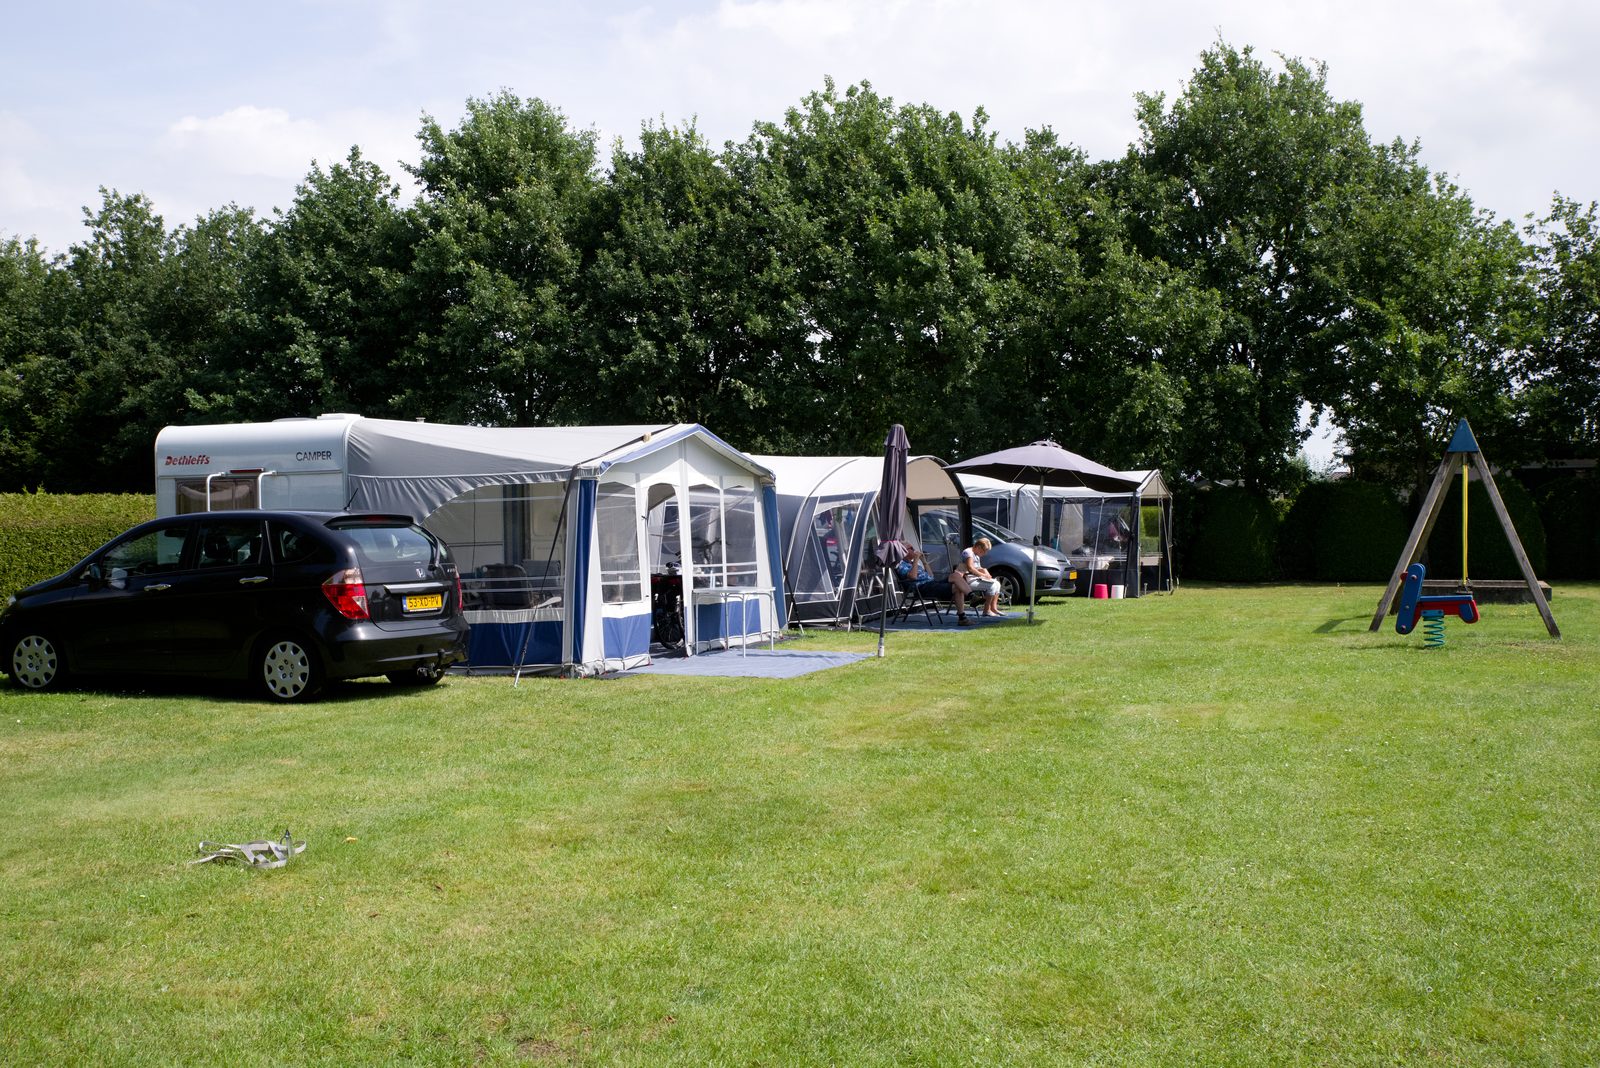 Camping in the Assen area